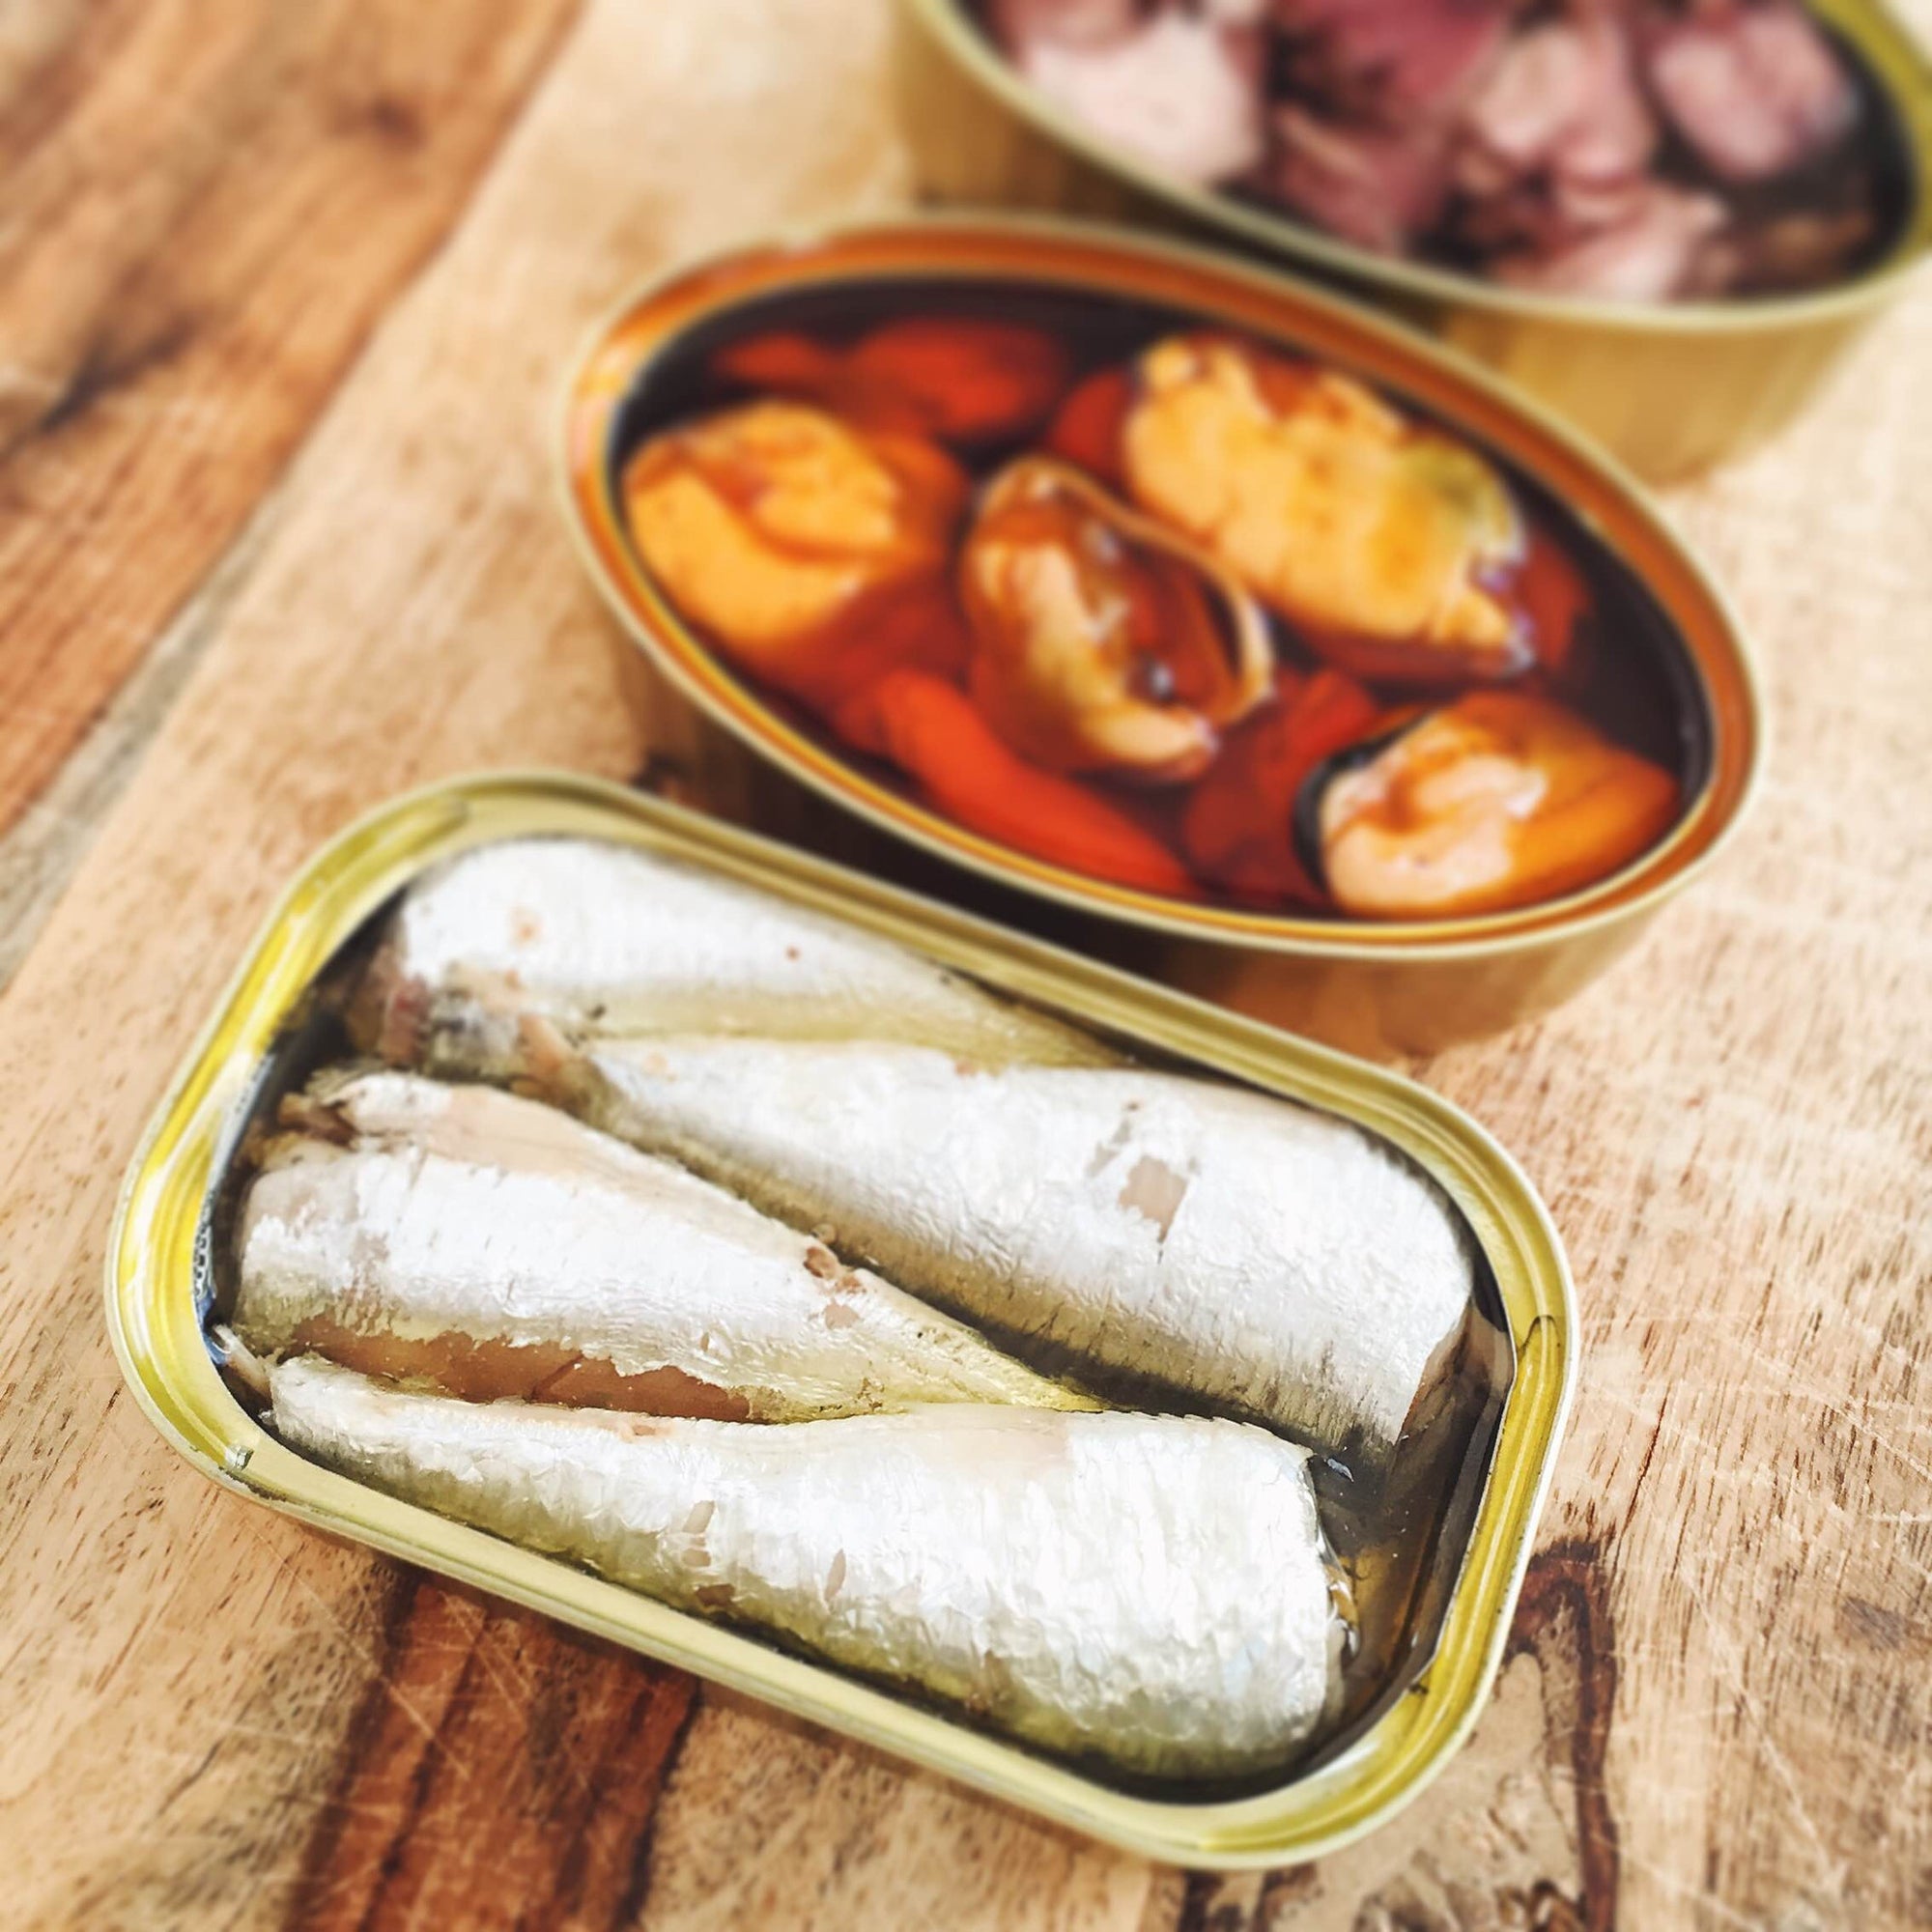 Conservas in the News: Spanish Tinned Seafood "The Next Trendy Appetizer"